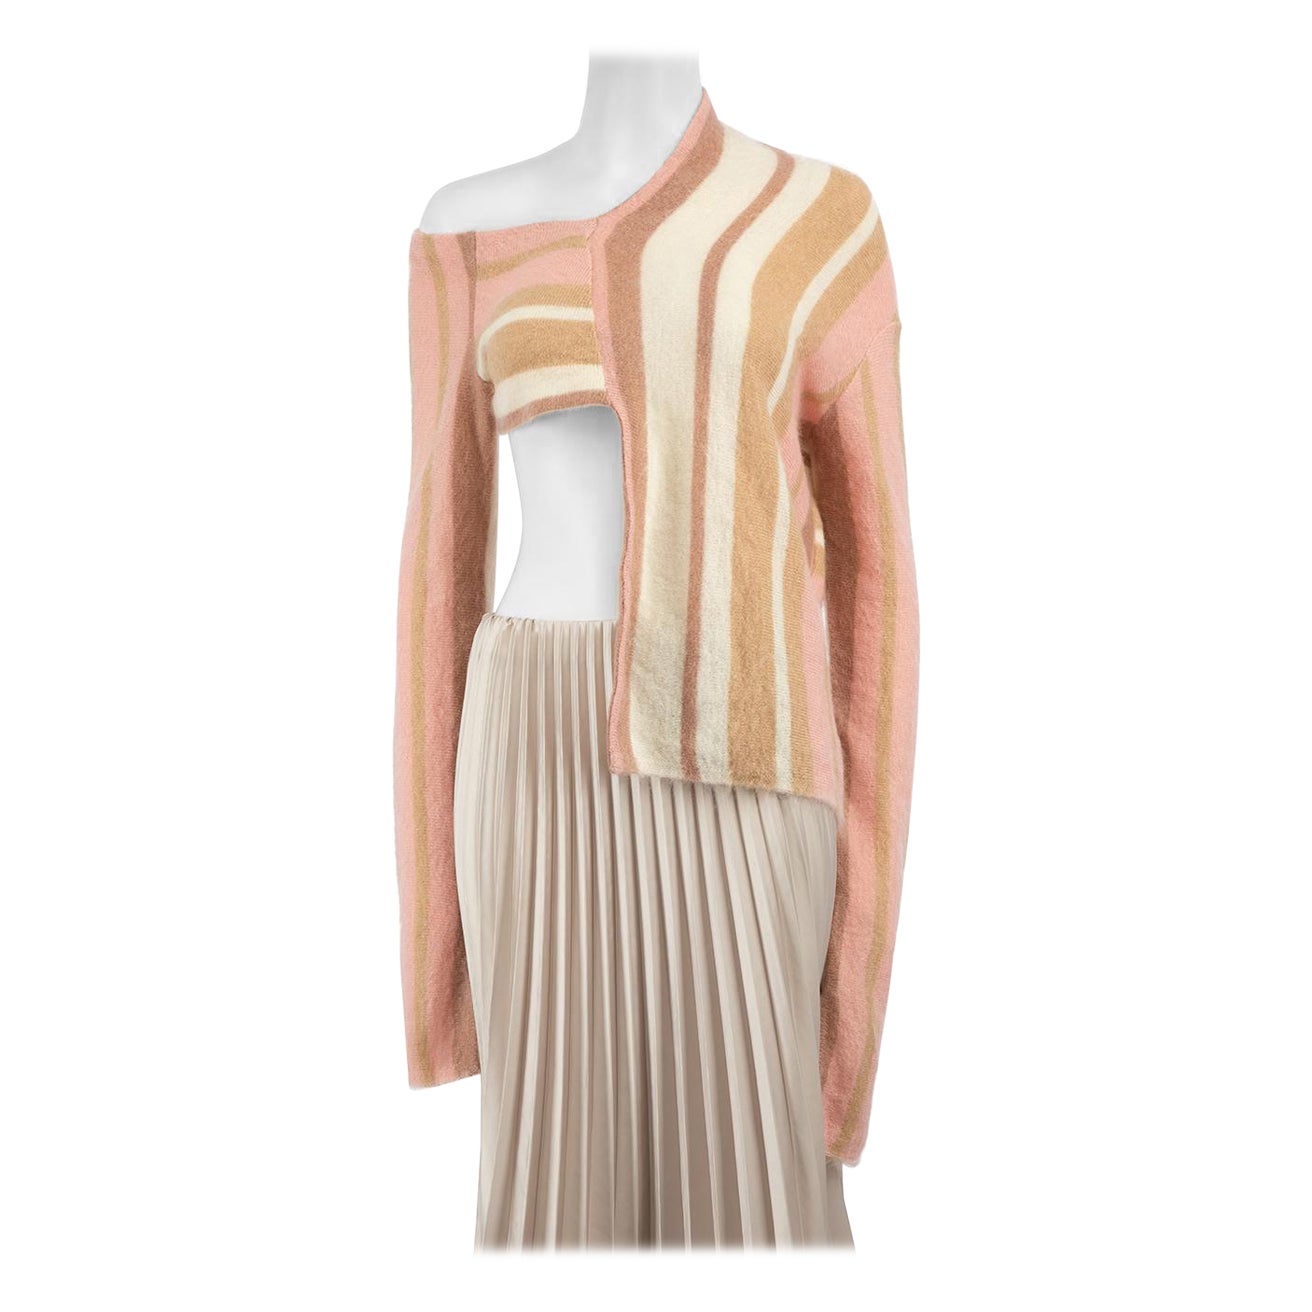 Peter Pilotto Pink Striped Asymmetric Knit Jumper Size S For Sale